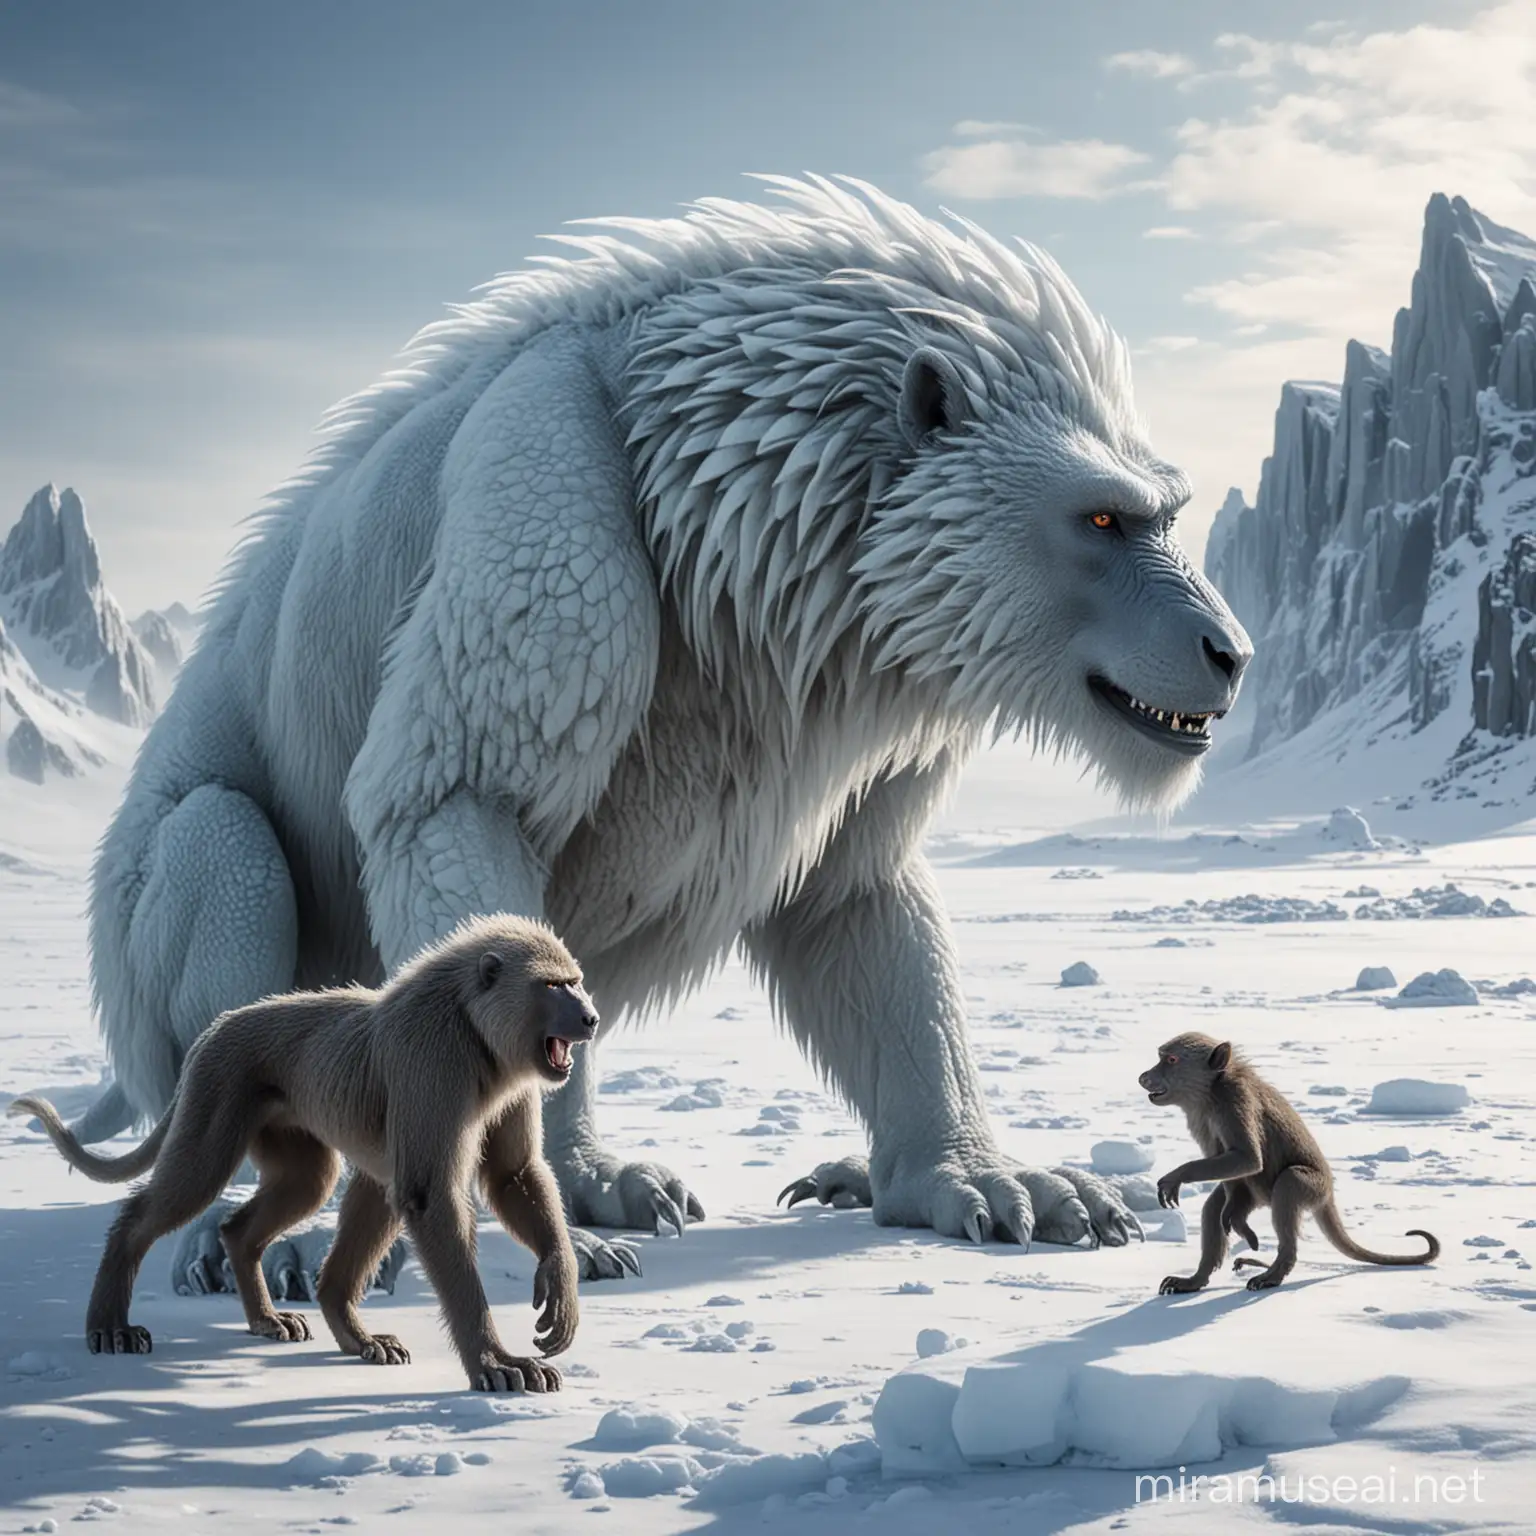 Majestic Ice Dragon Encountering a Curious Baboon in a Glacial Landscape